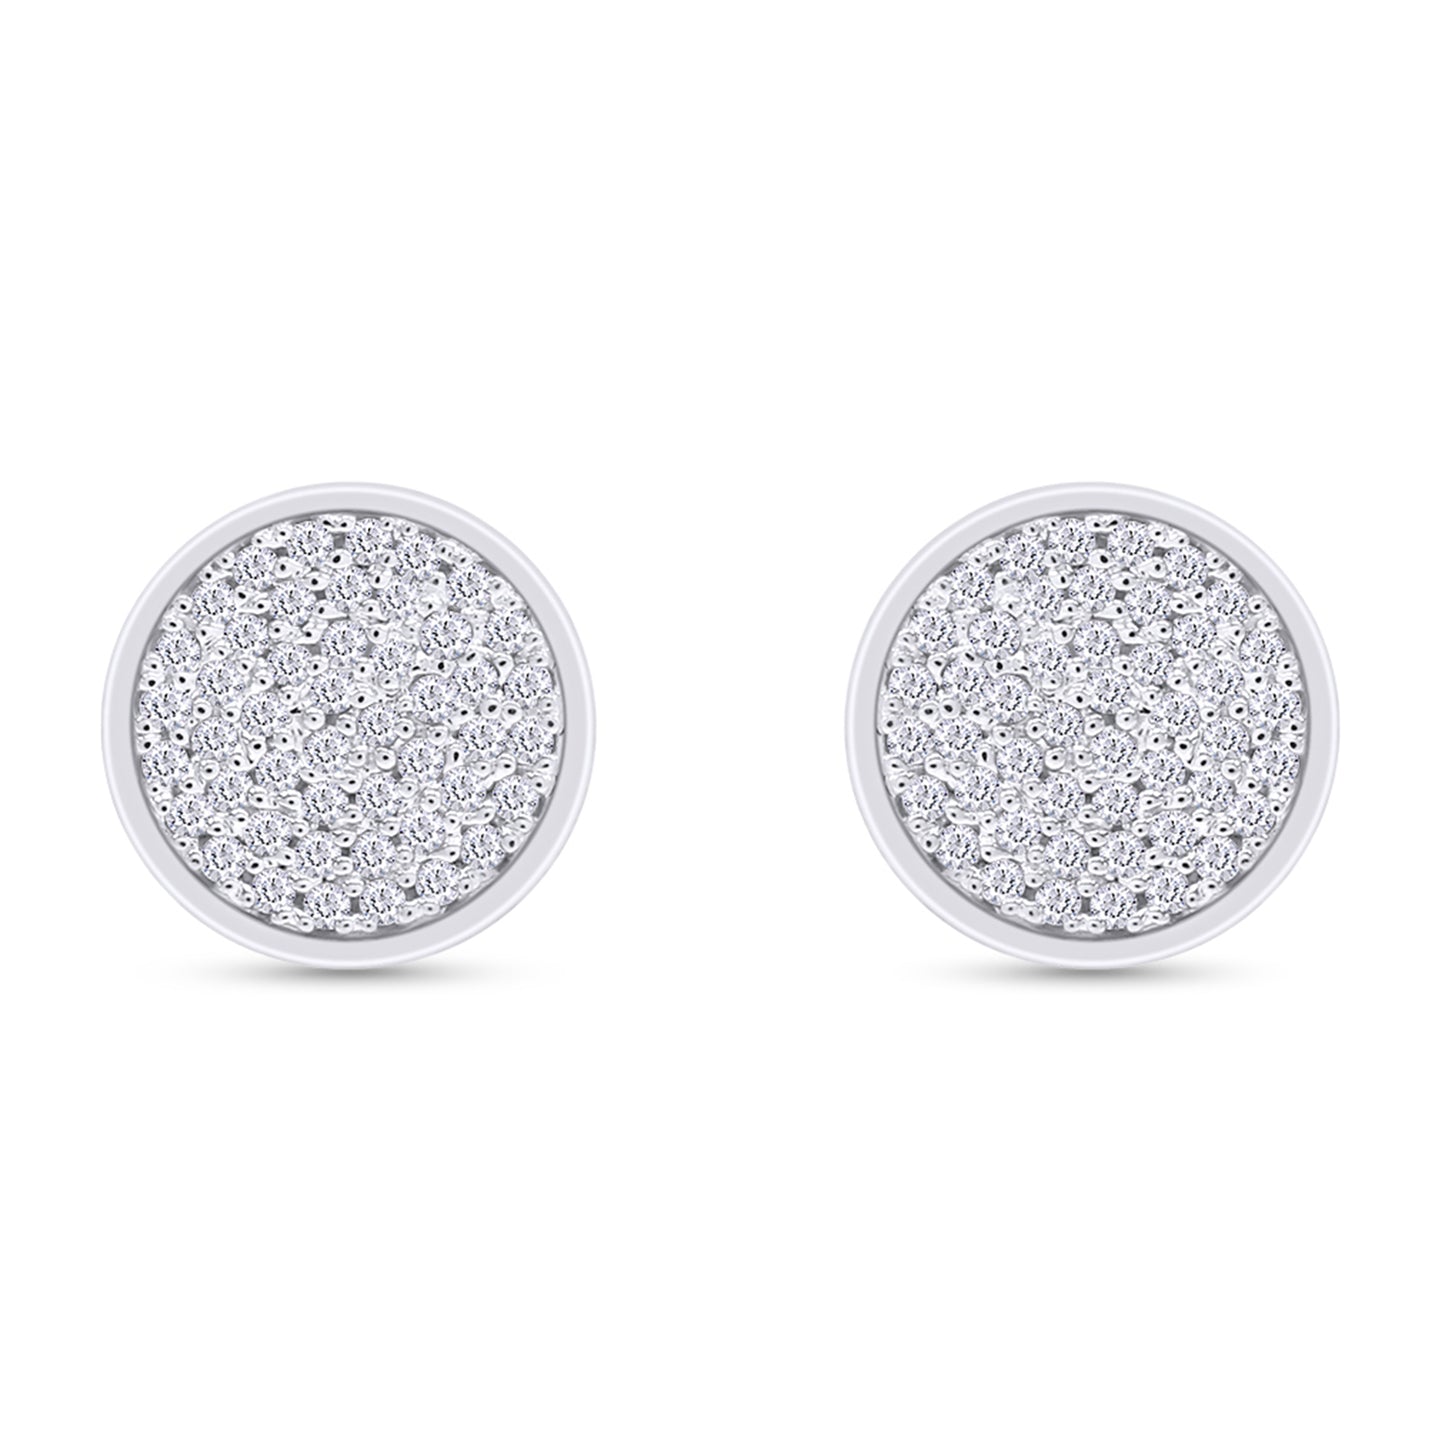 Round Cut White Cubic Zirconia Flat Disc Stud Earrings For Women In 925 Sterling Silver With Push Back